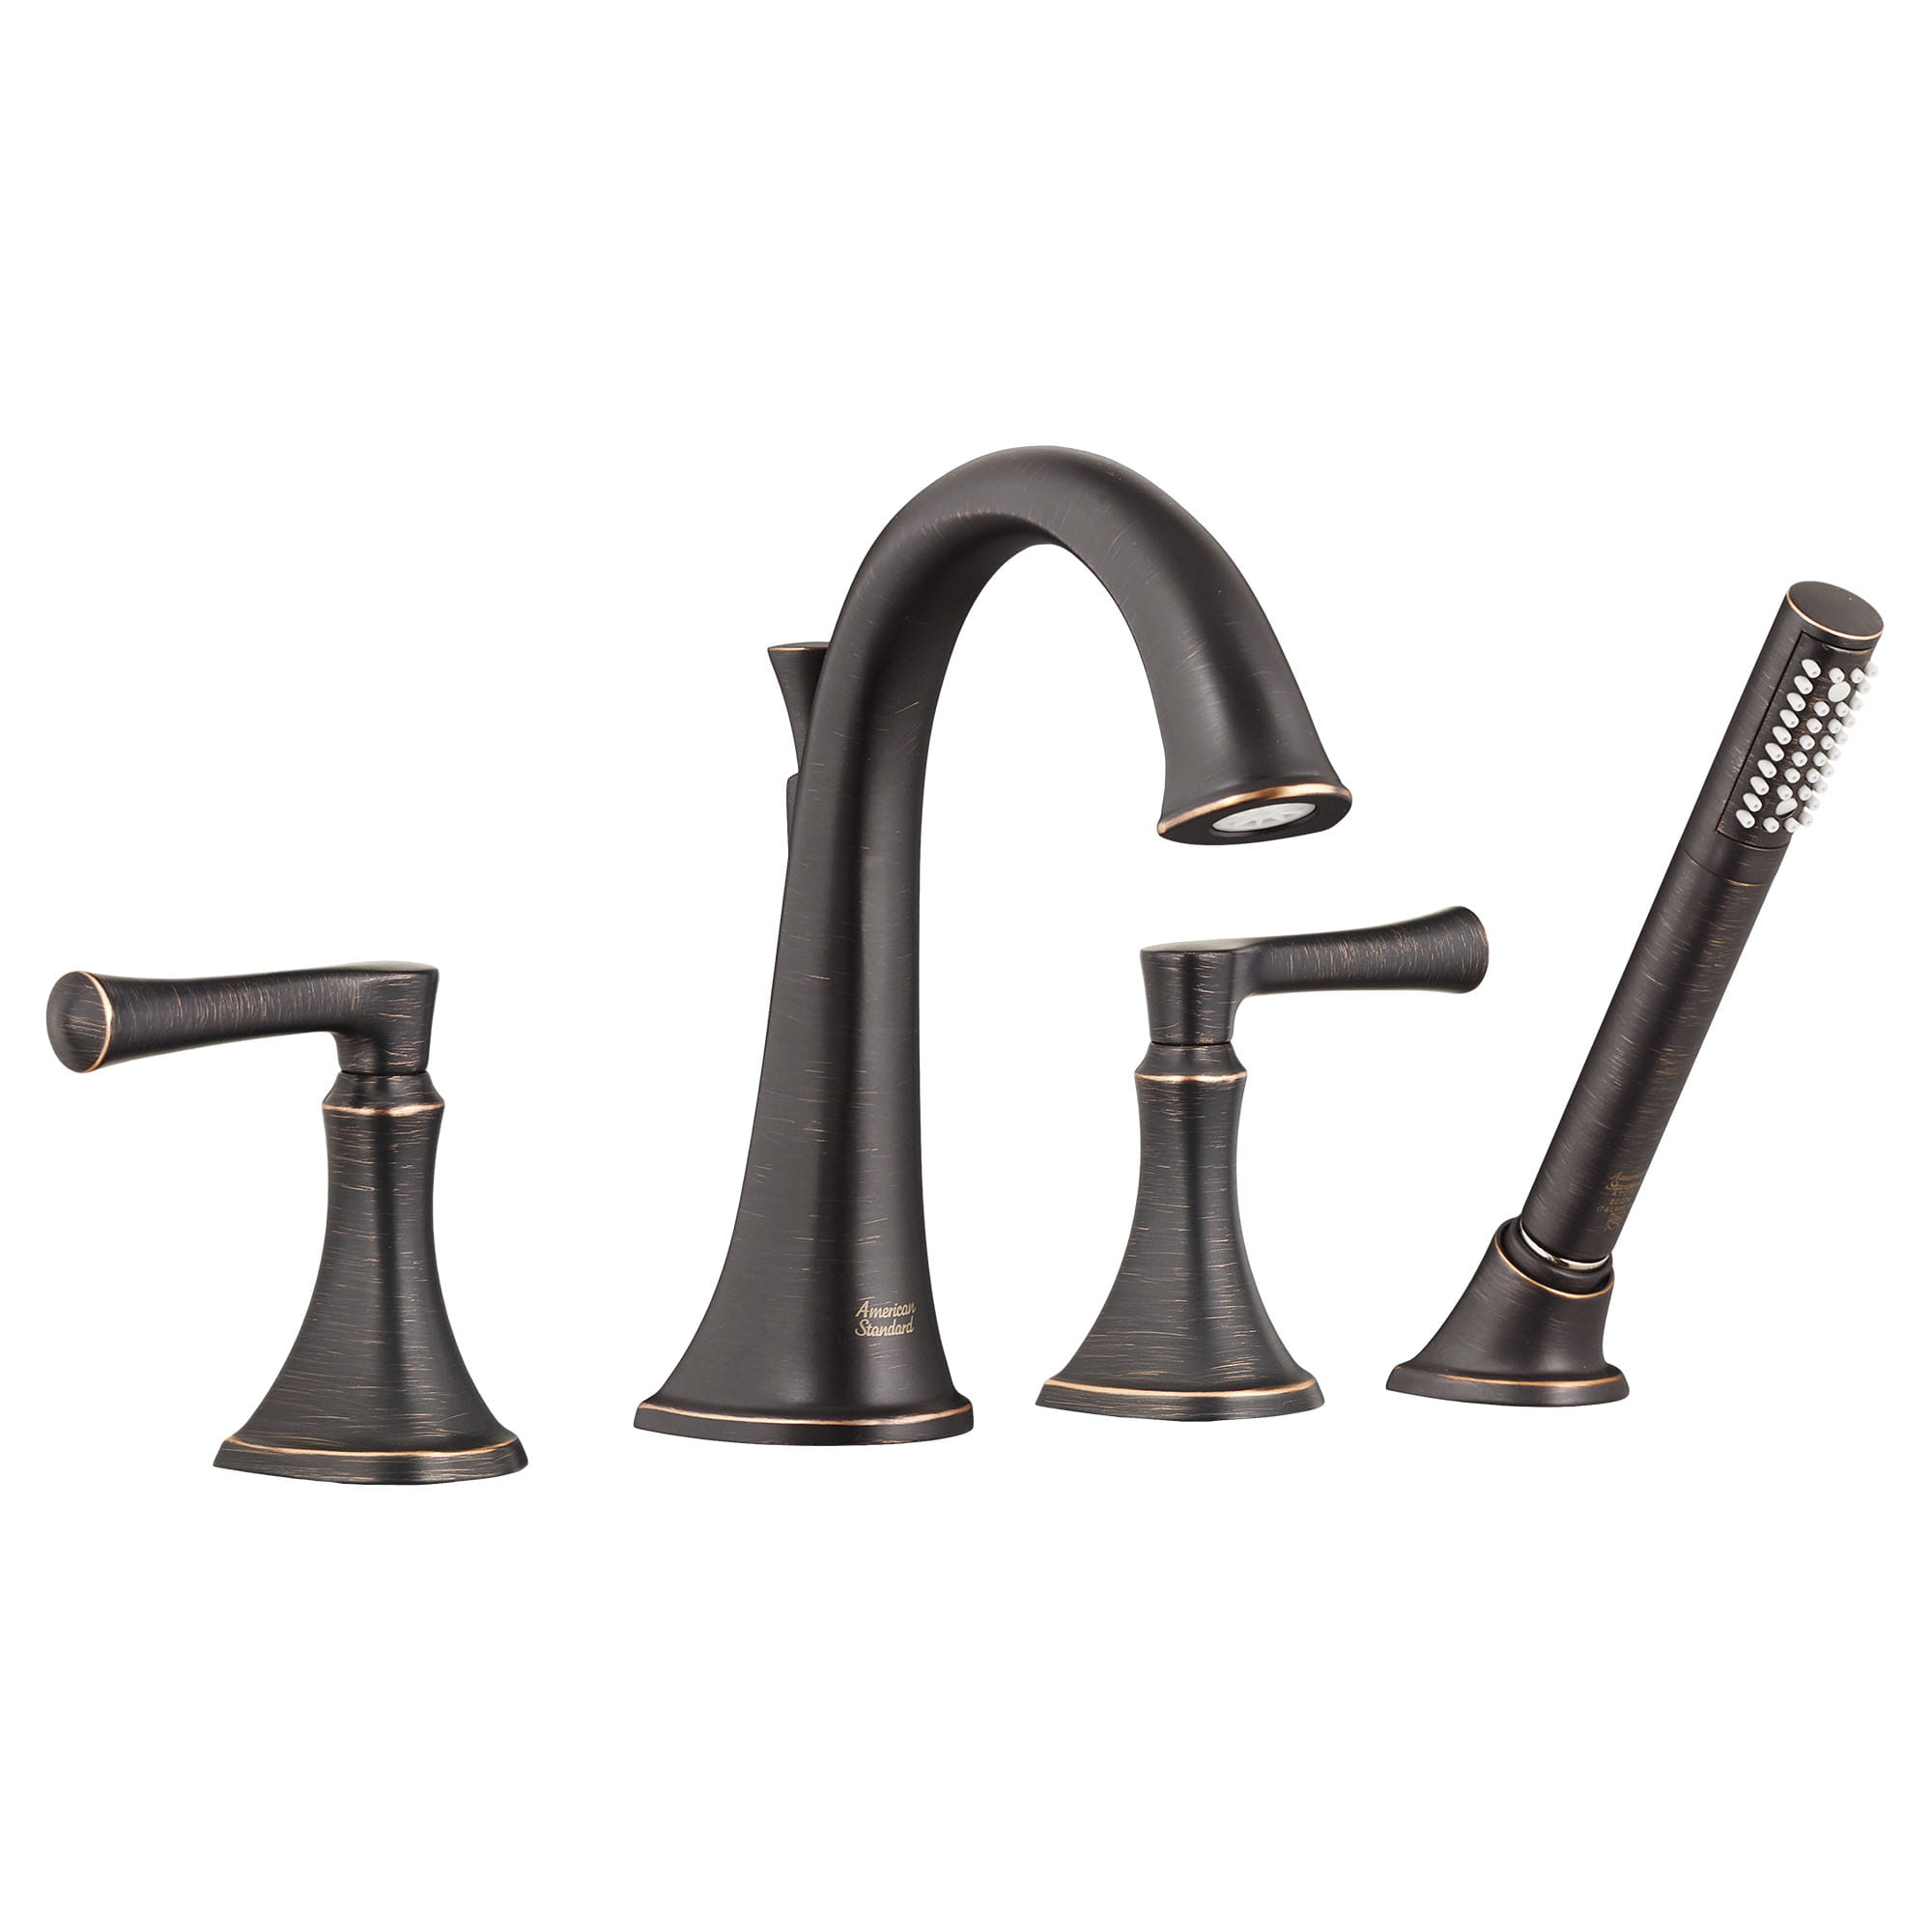 Estate Bathtub Faucet With Personal Shower for Flash Rough In Valve With Lever Handles LEGACY BRONZE